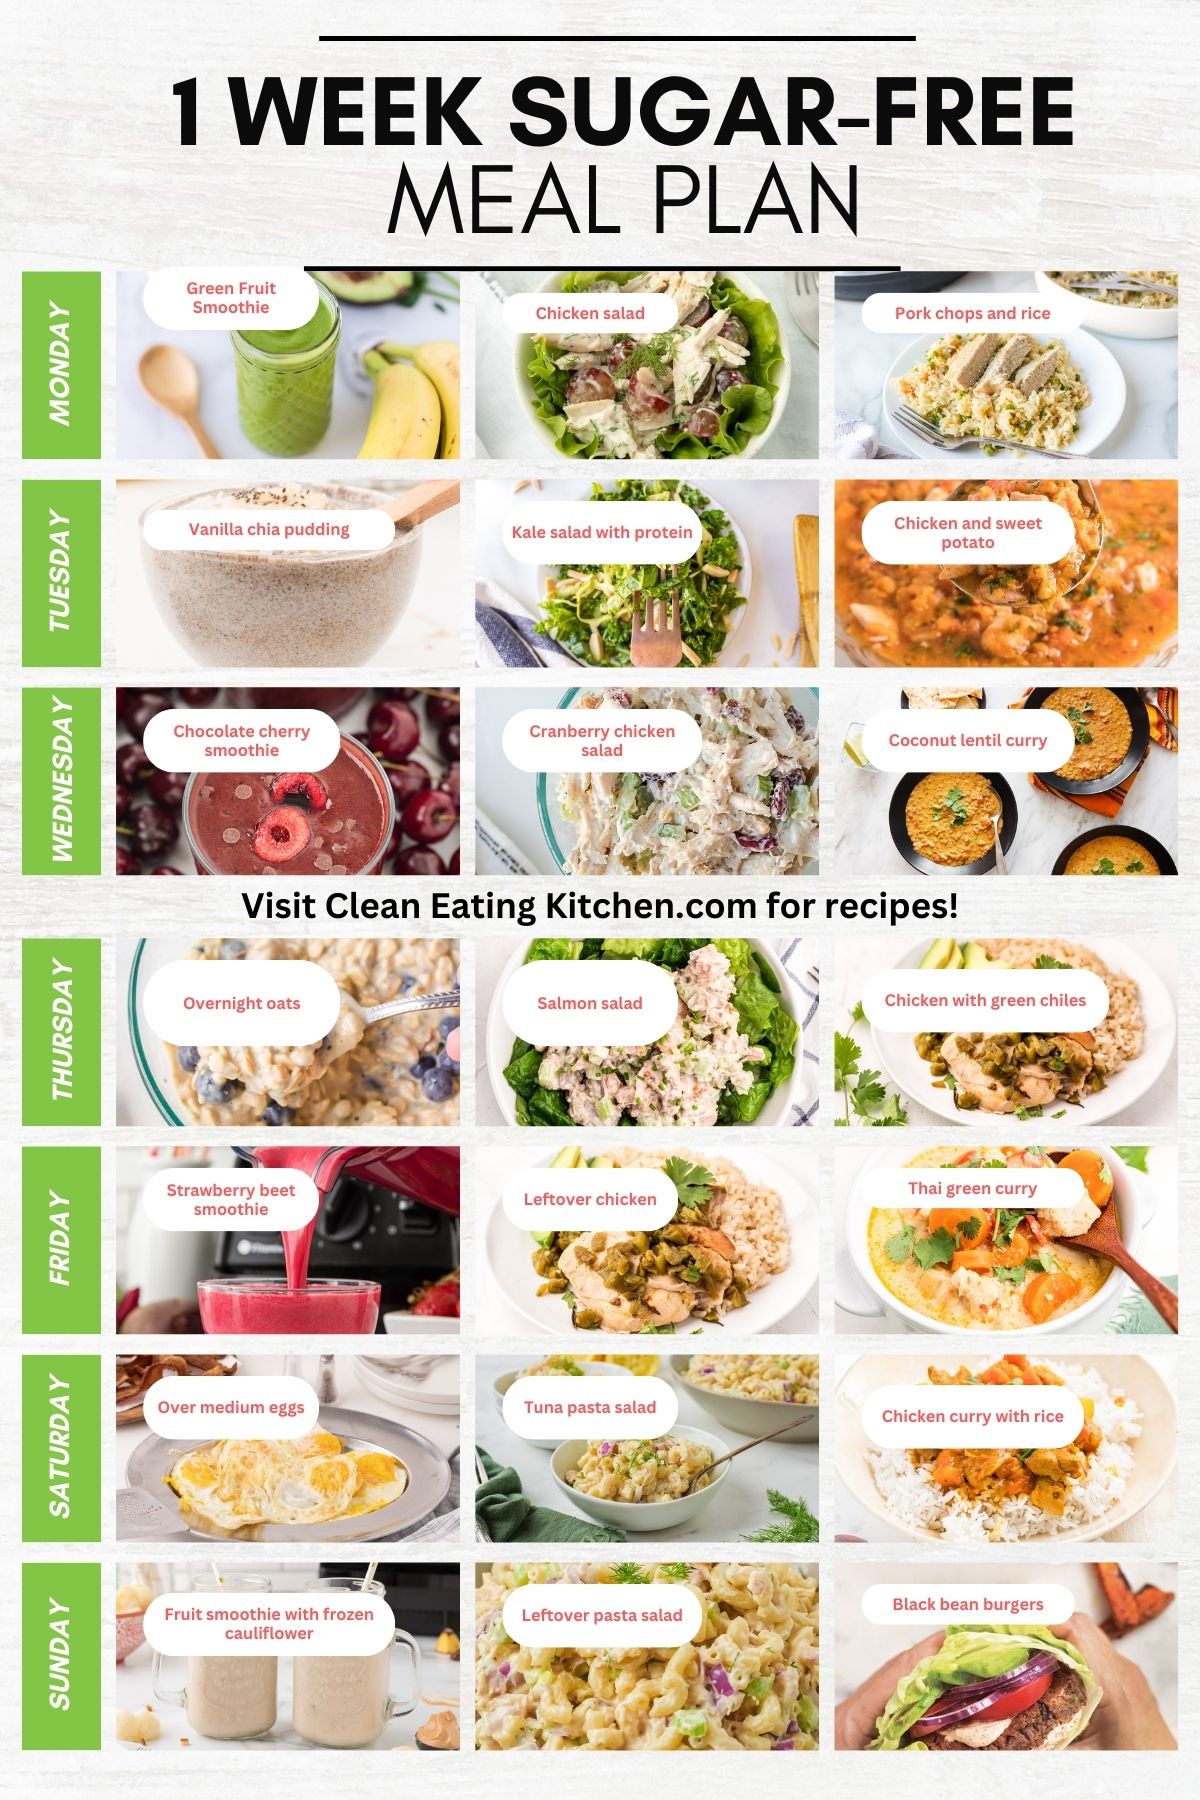 one week sugar free meal plan with pictures of meals.